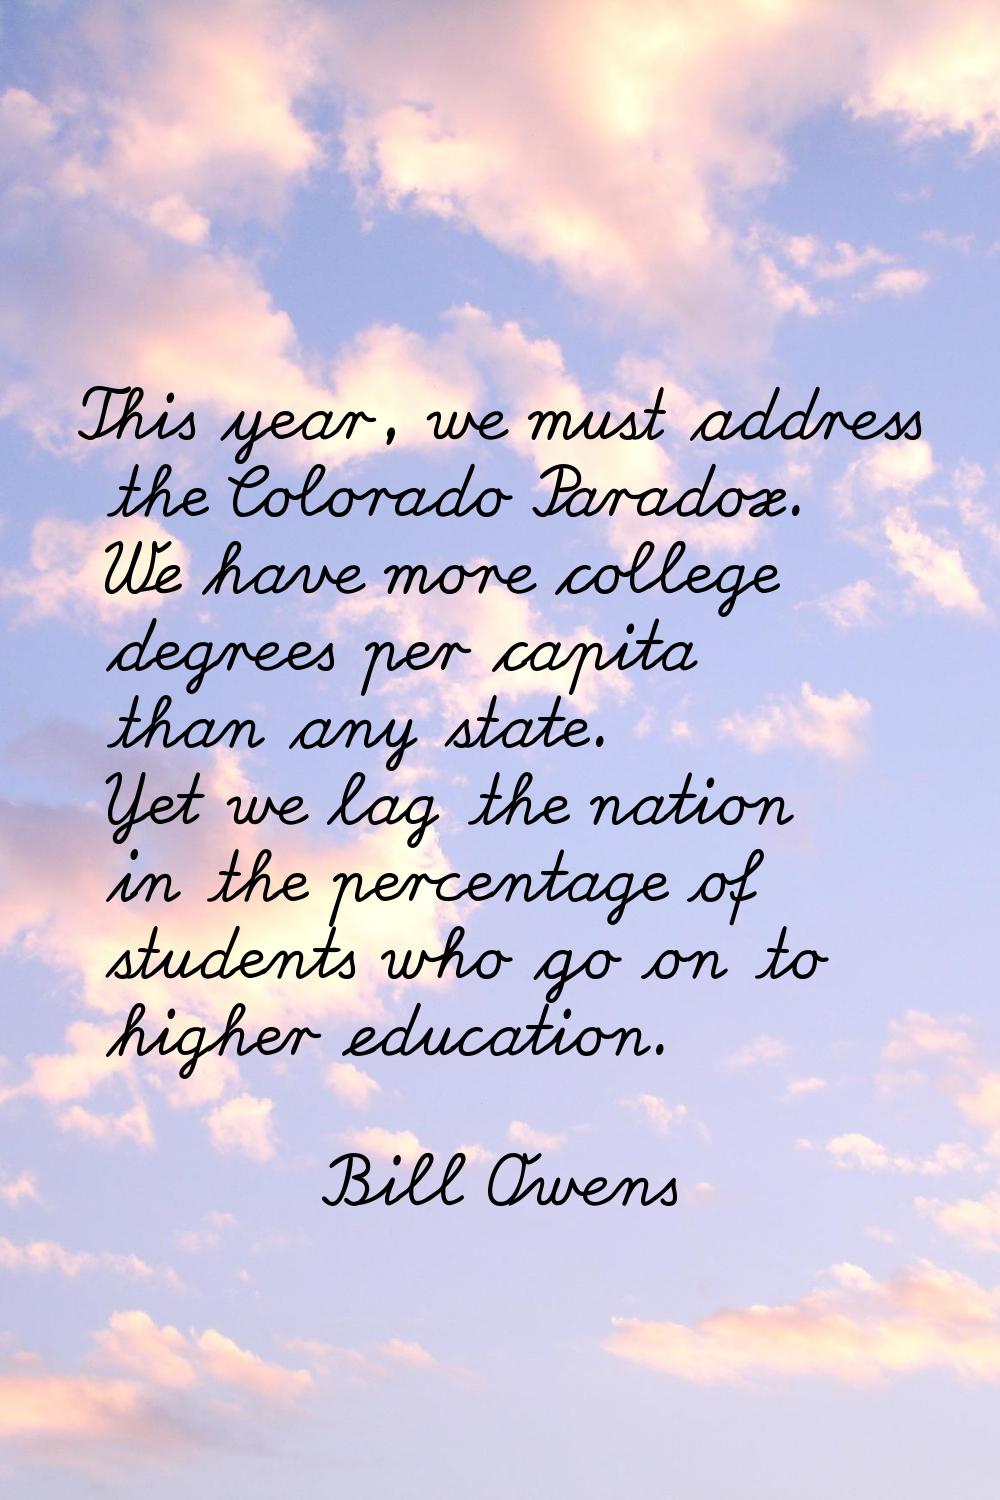 This year, we must address the Colorado Paradox. We have more college degrees per capita than any s